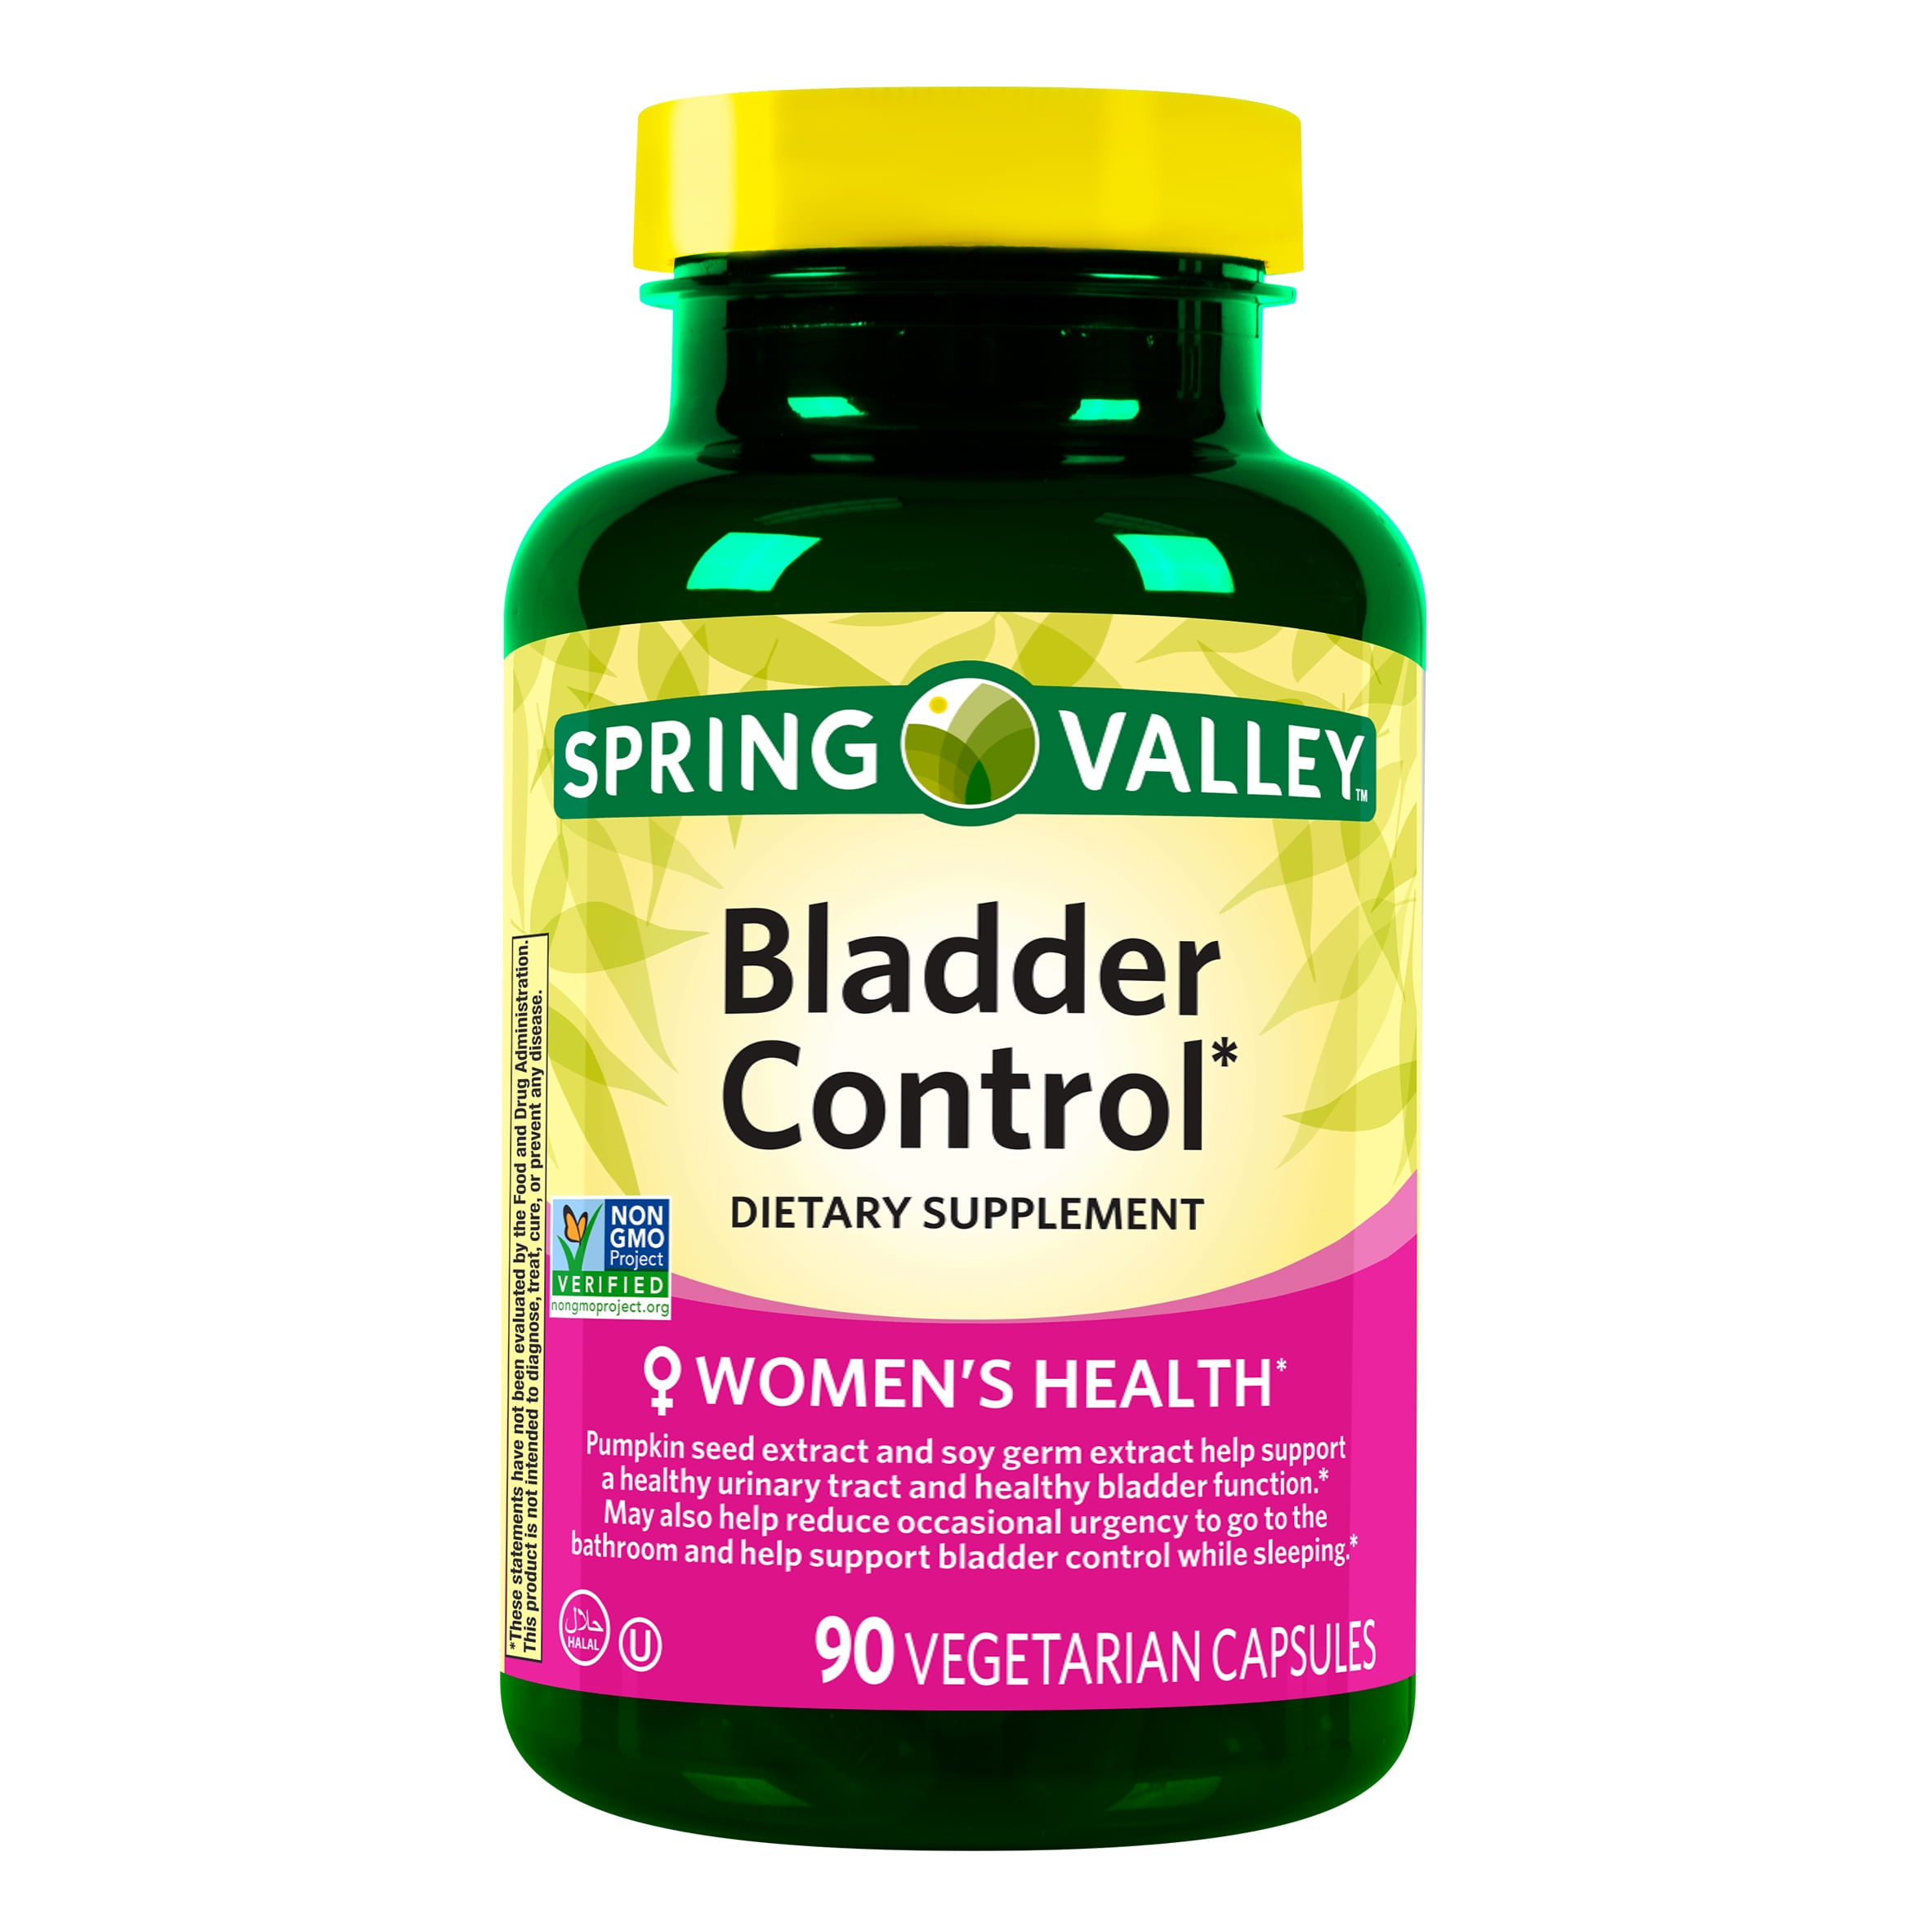 Seniors' Health as related to Bladder Control - Pictures